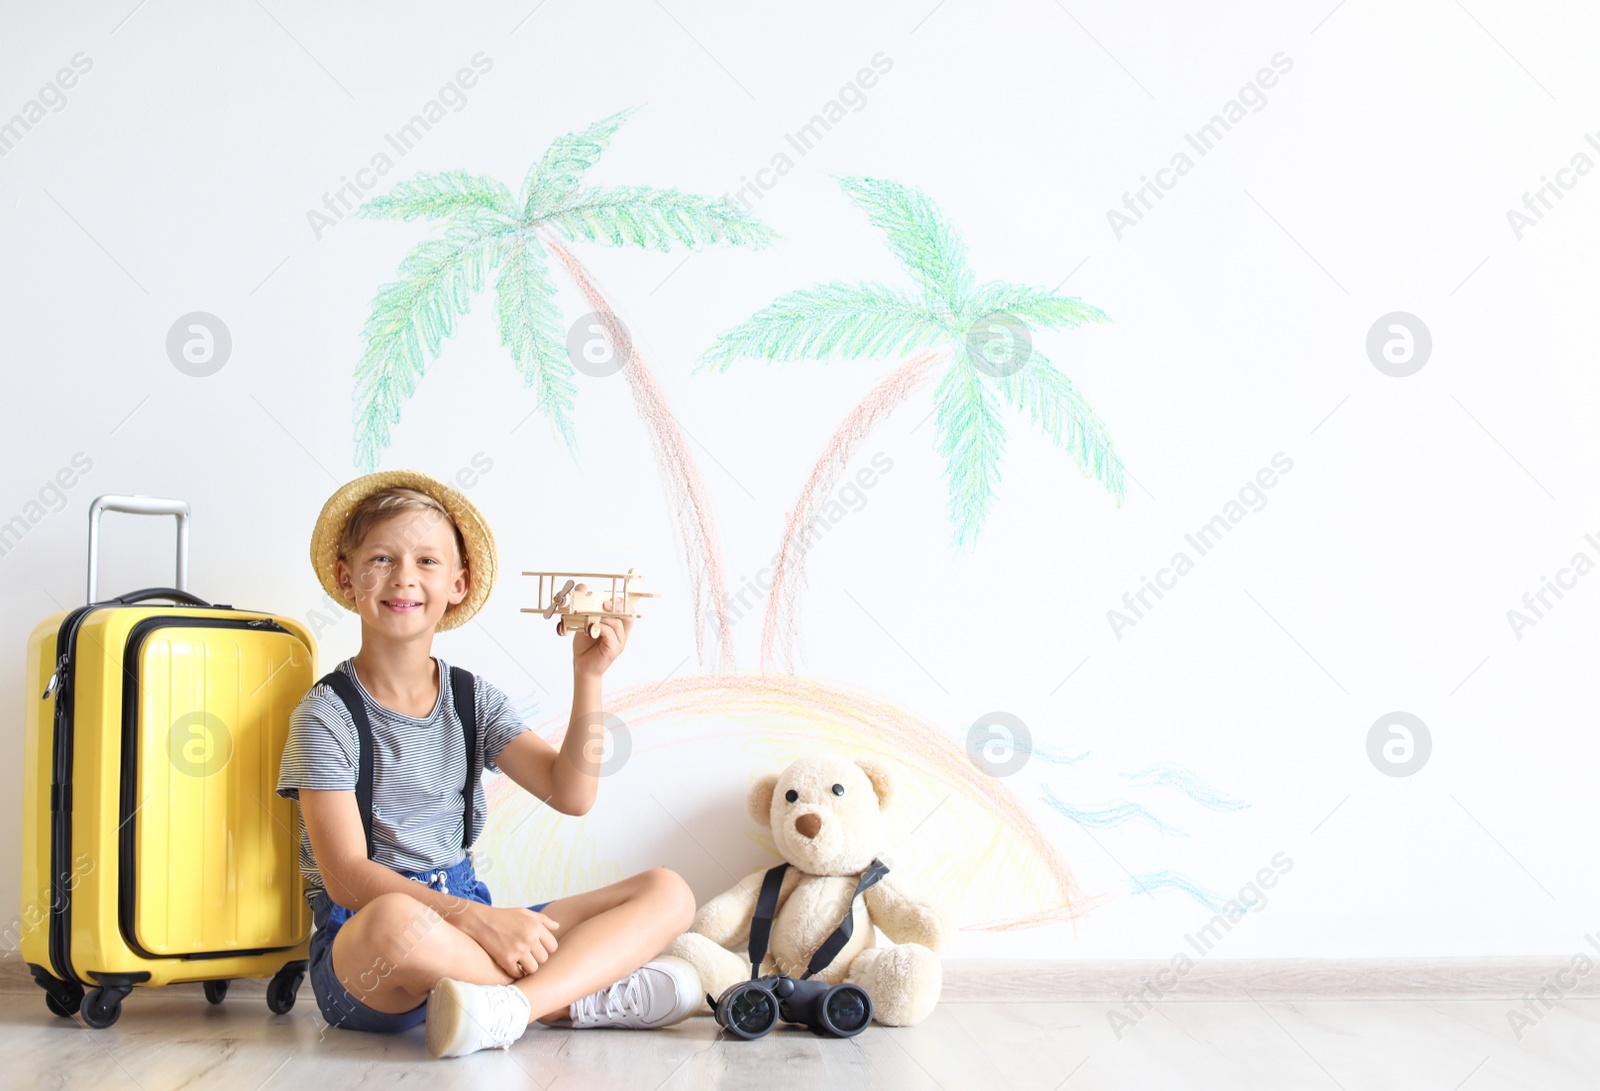 Photo of Adorable little child playing with toy airplane indoors